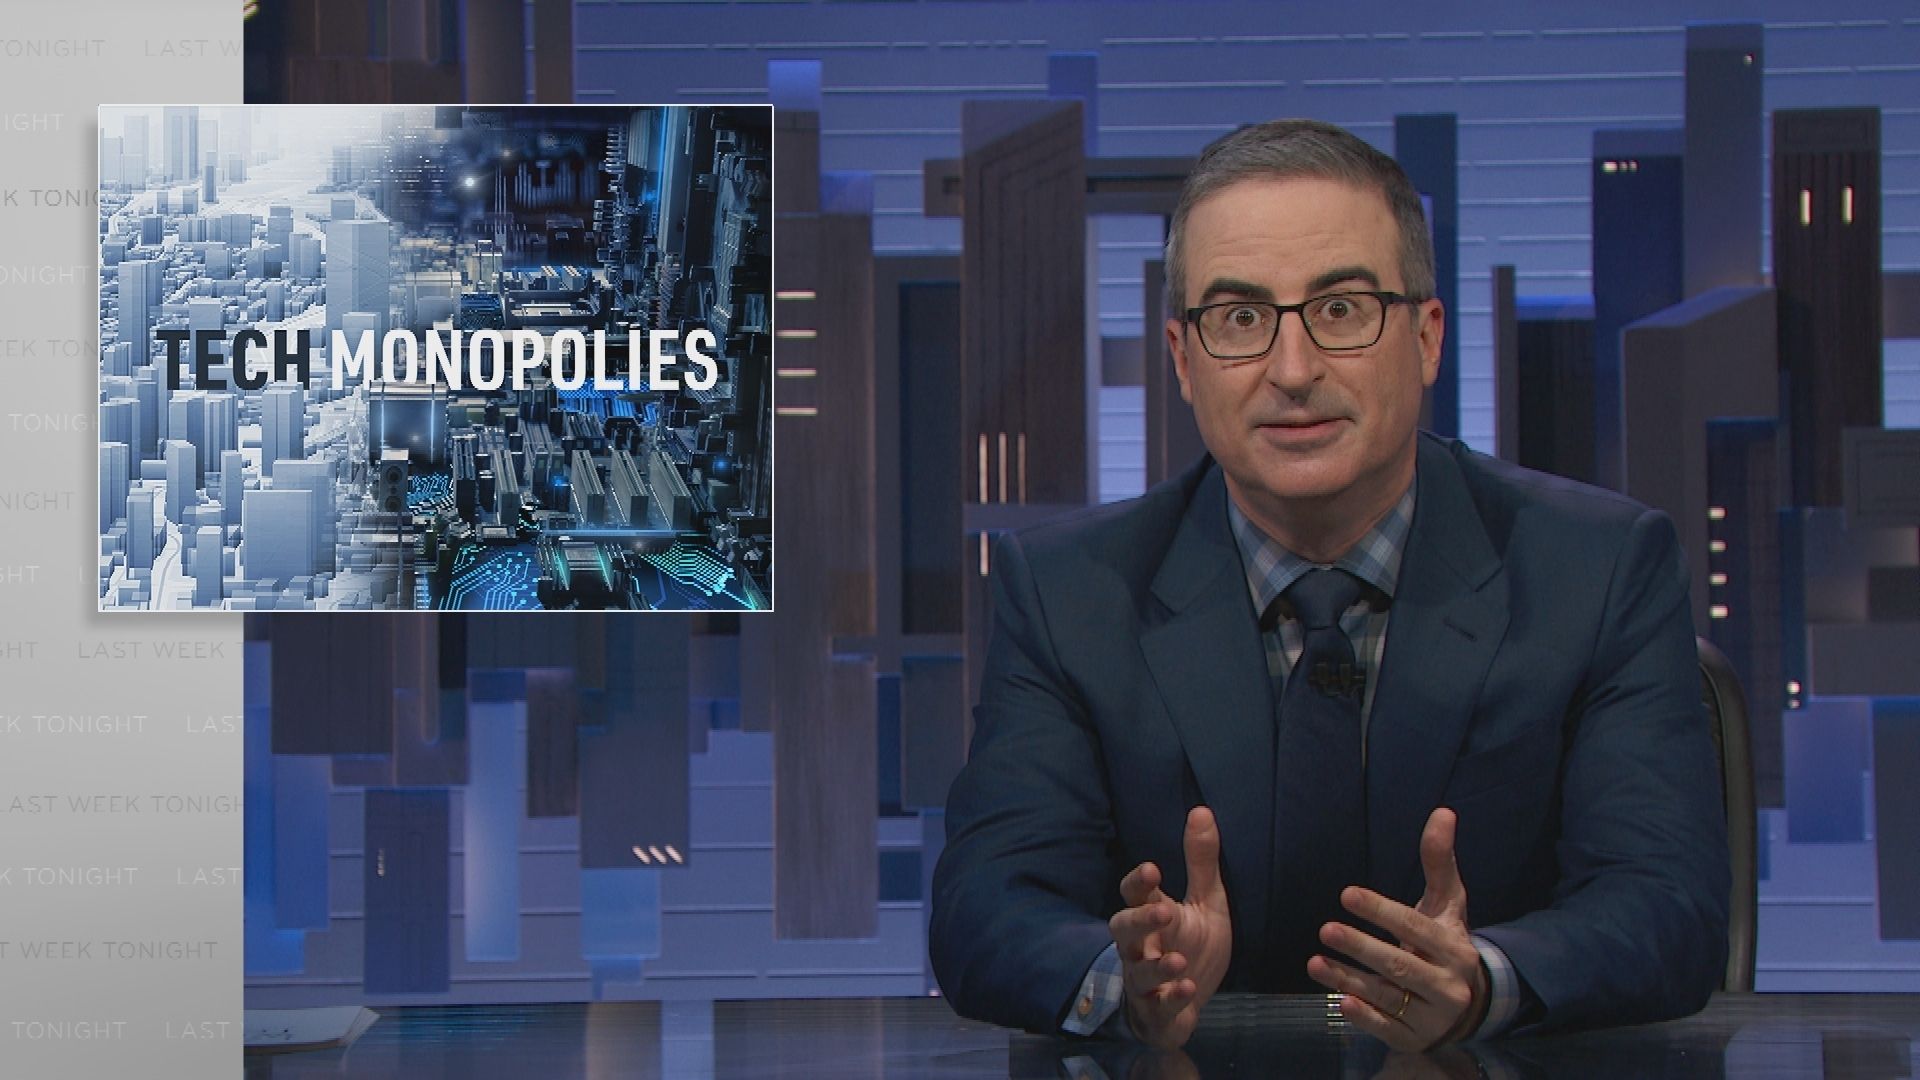 John Oliver discusses tech monopolies on his show Last Week Tonight